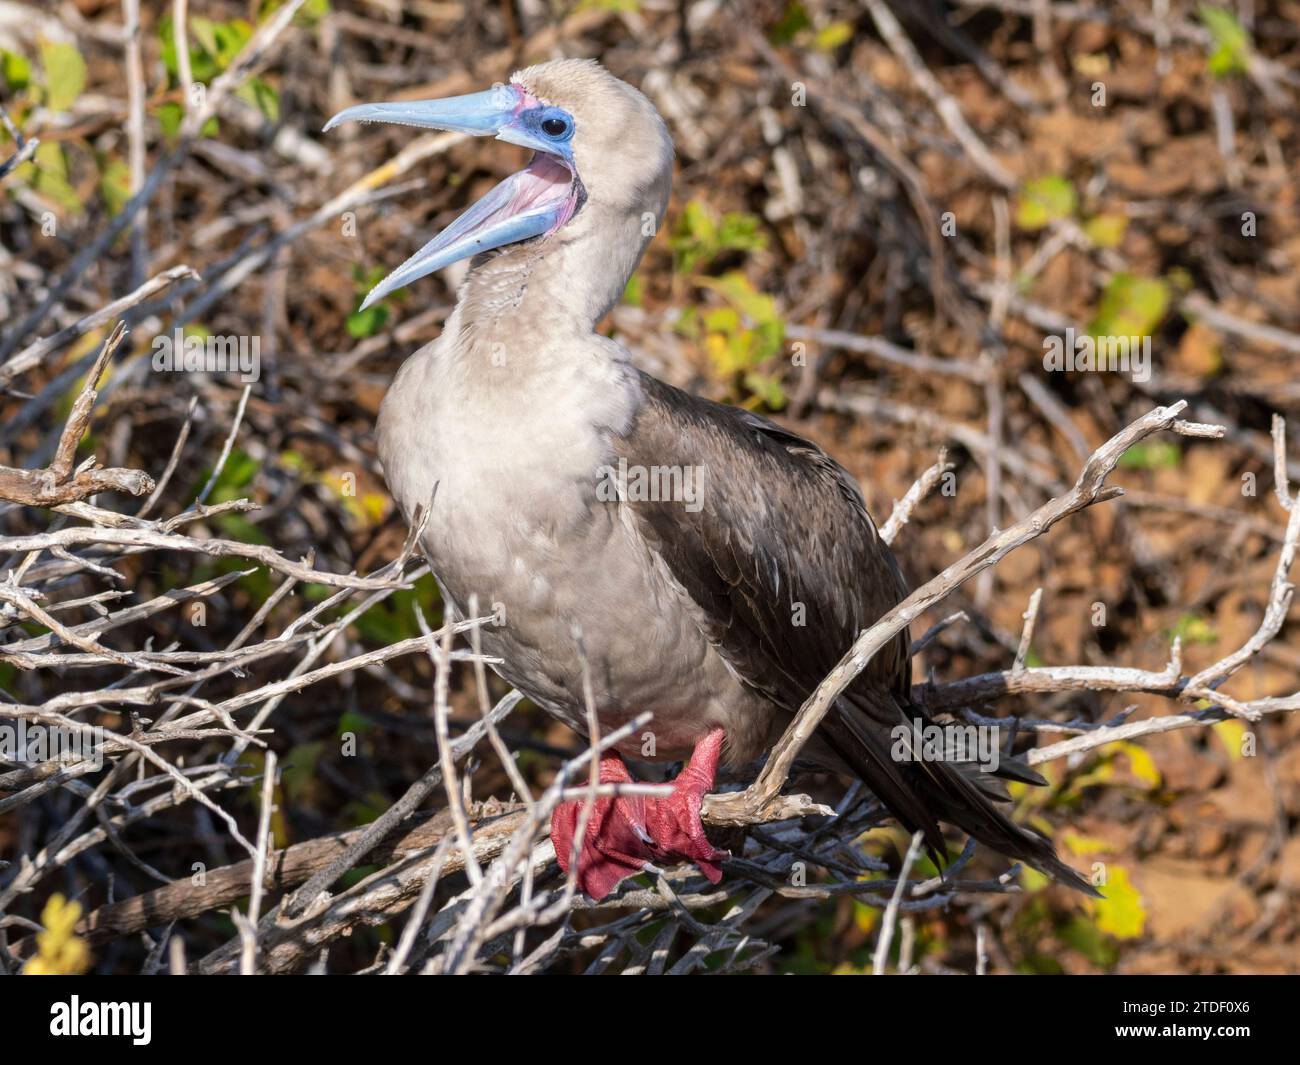 An adult red-footed booby (Sula sula), at Punta Pitt, San Cristobal Island, Galapagos Islands, UNESCO World Heritage Site, Ecuador, South America Stock Photo